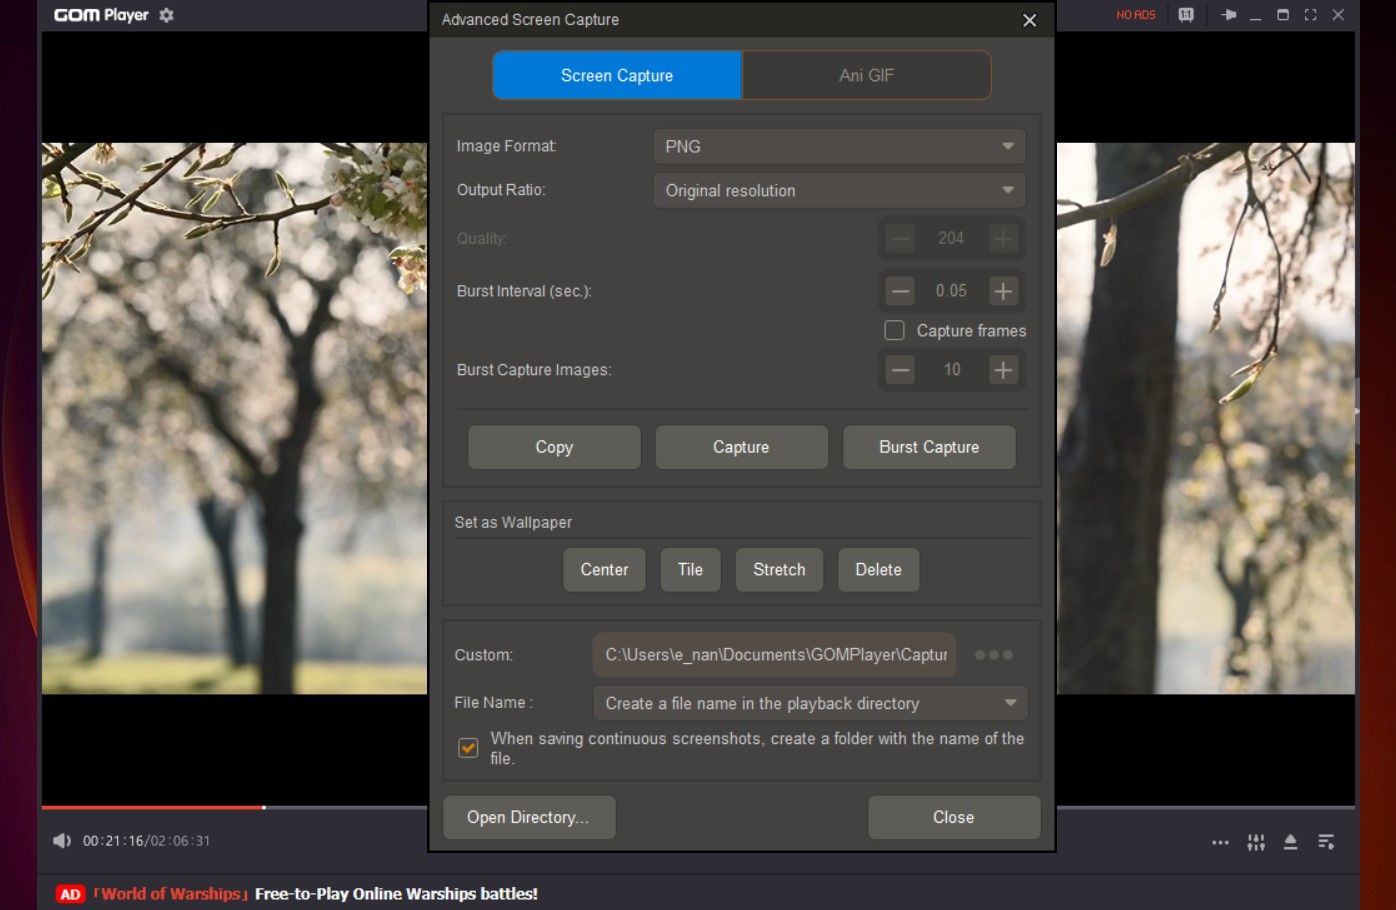 Advanced Screen Capture Settings on GOM Player